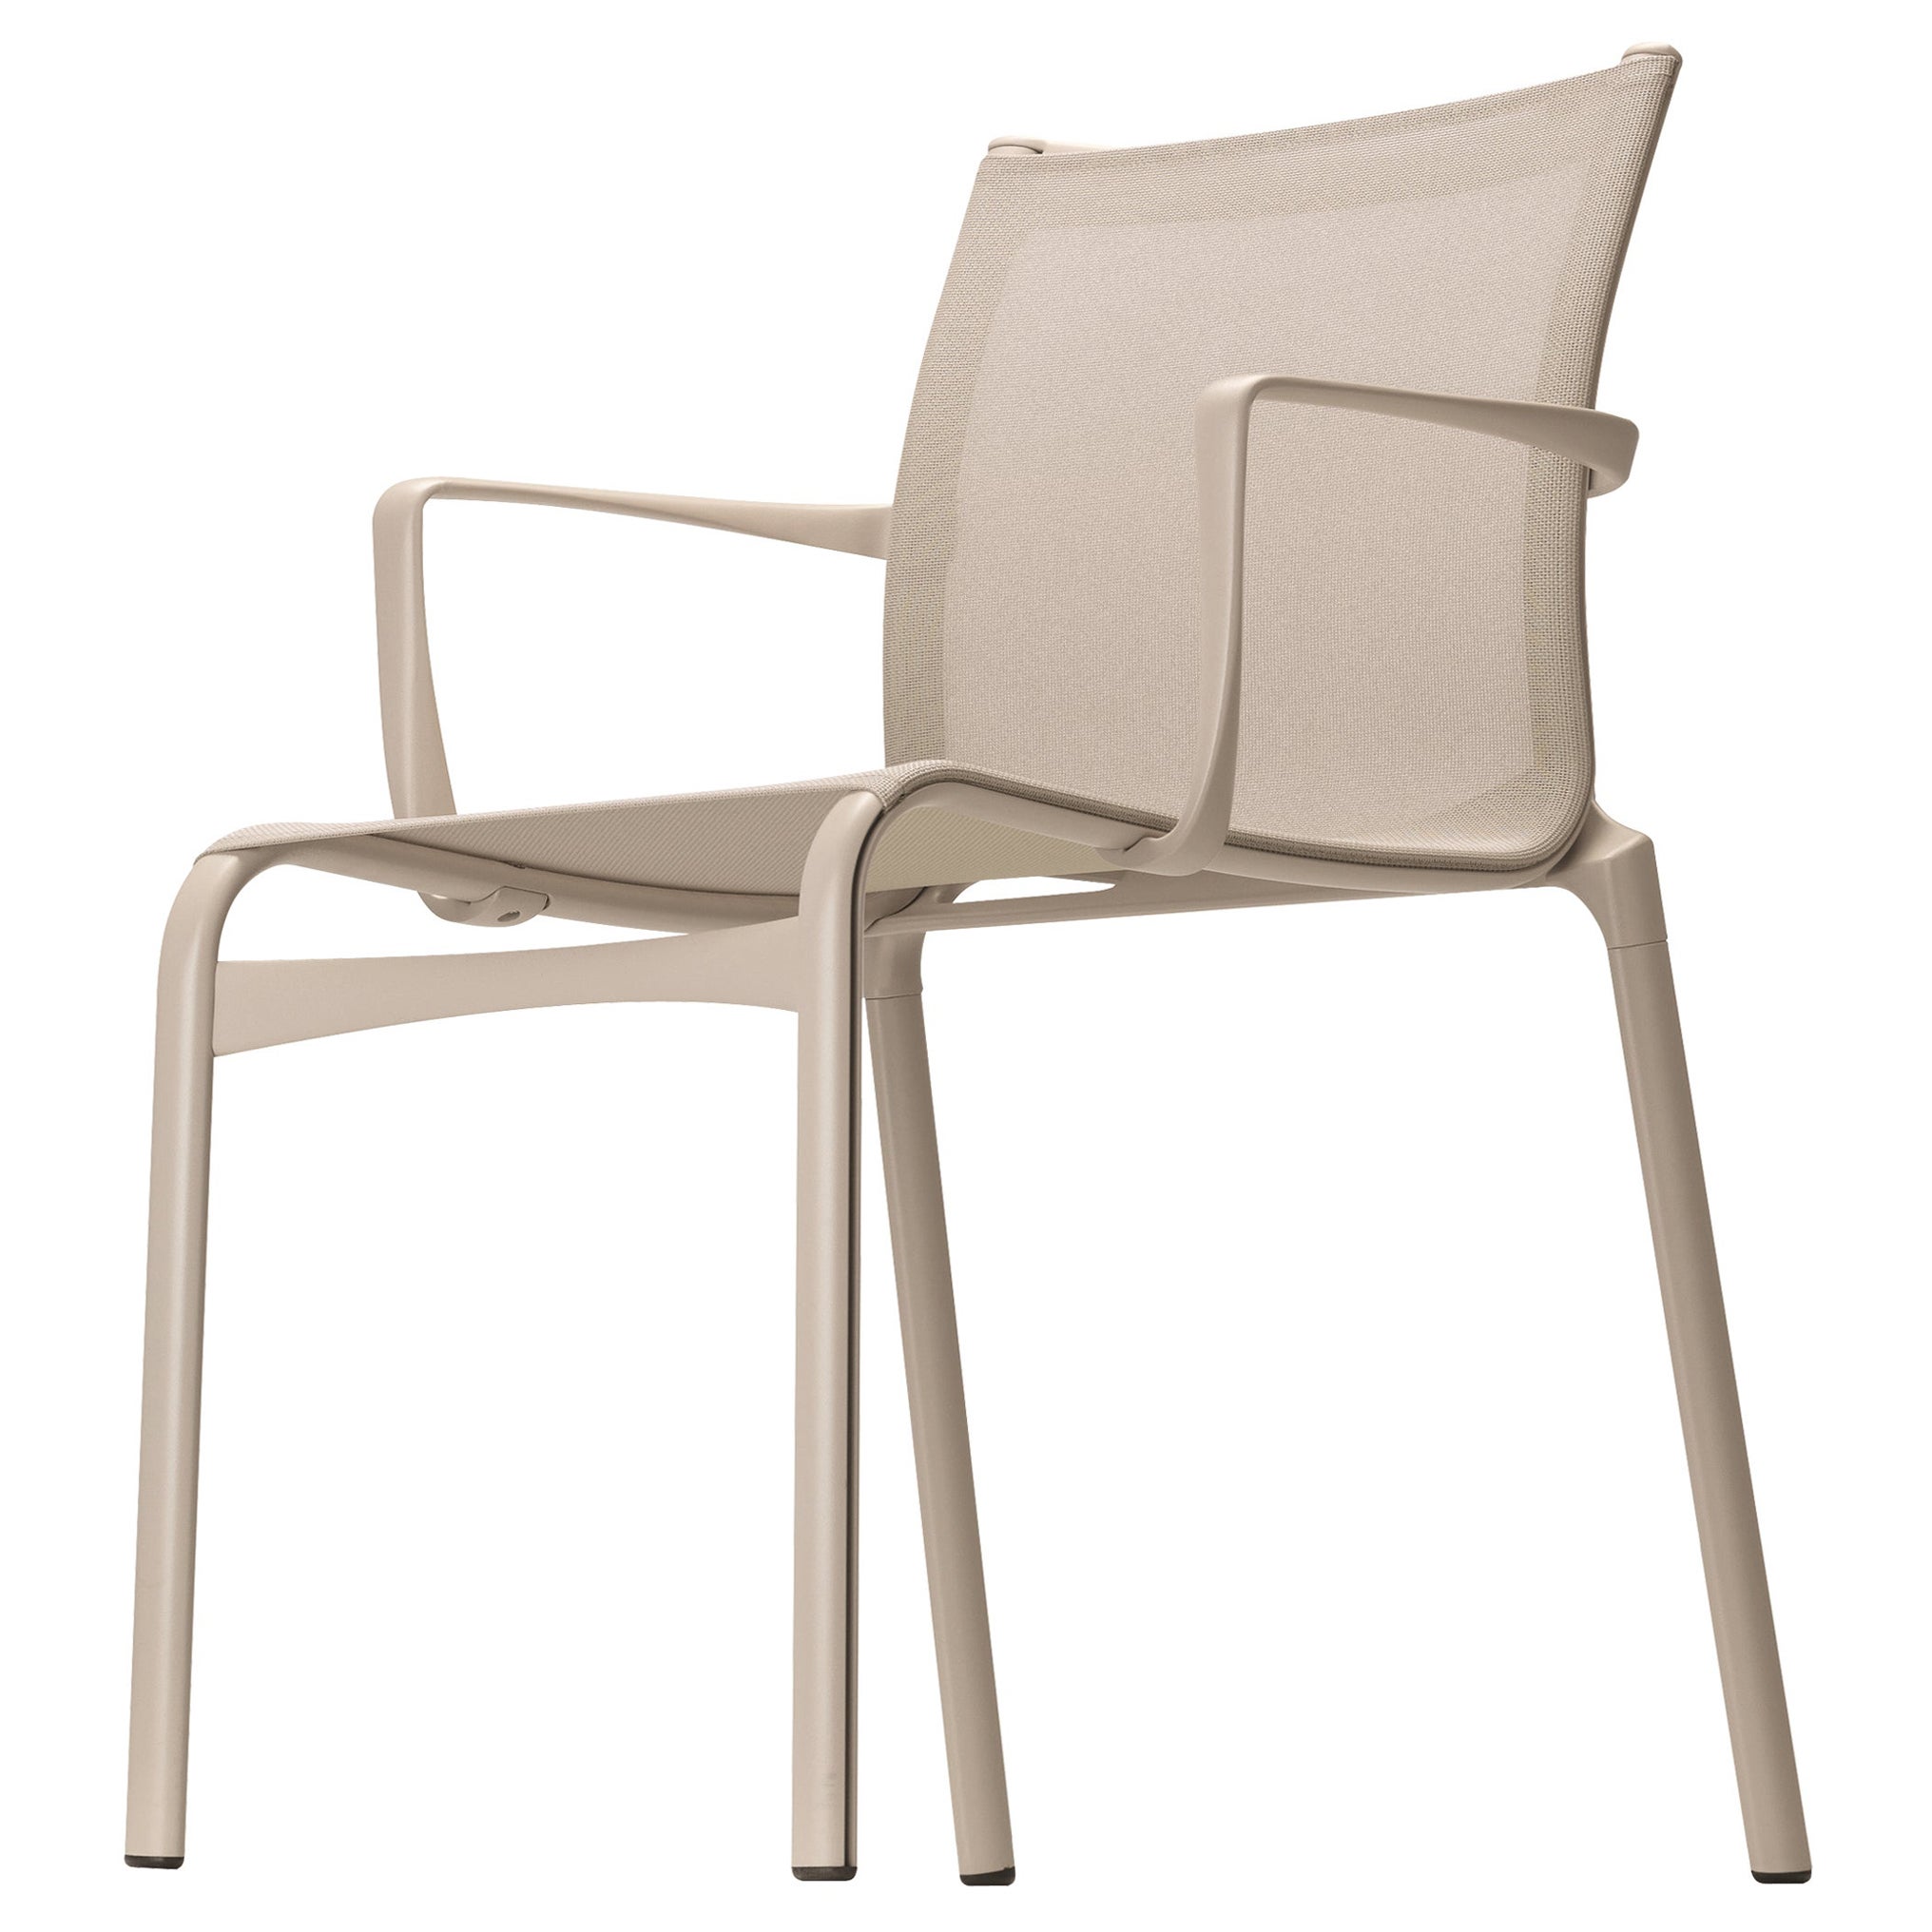 Alias Bigframe 44 Armchair in Sand Mesh with Sand Lacquered Aluminium Frame For Sale